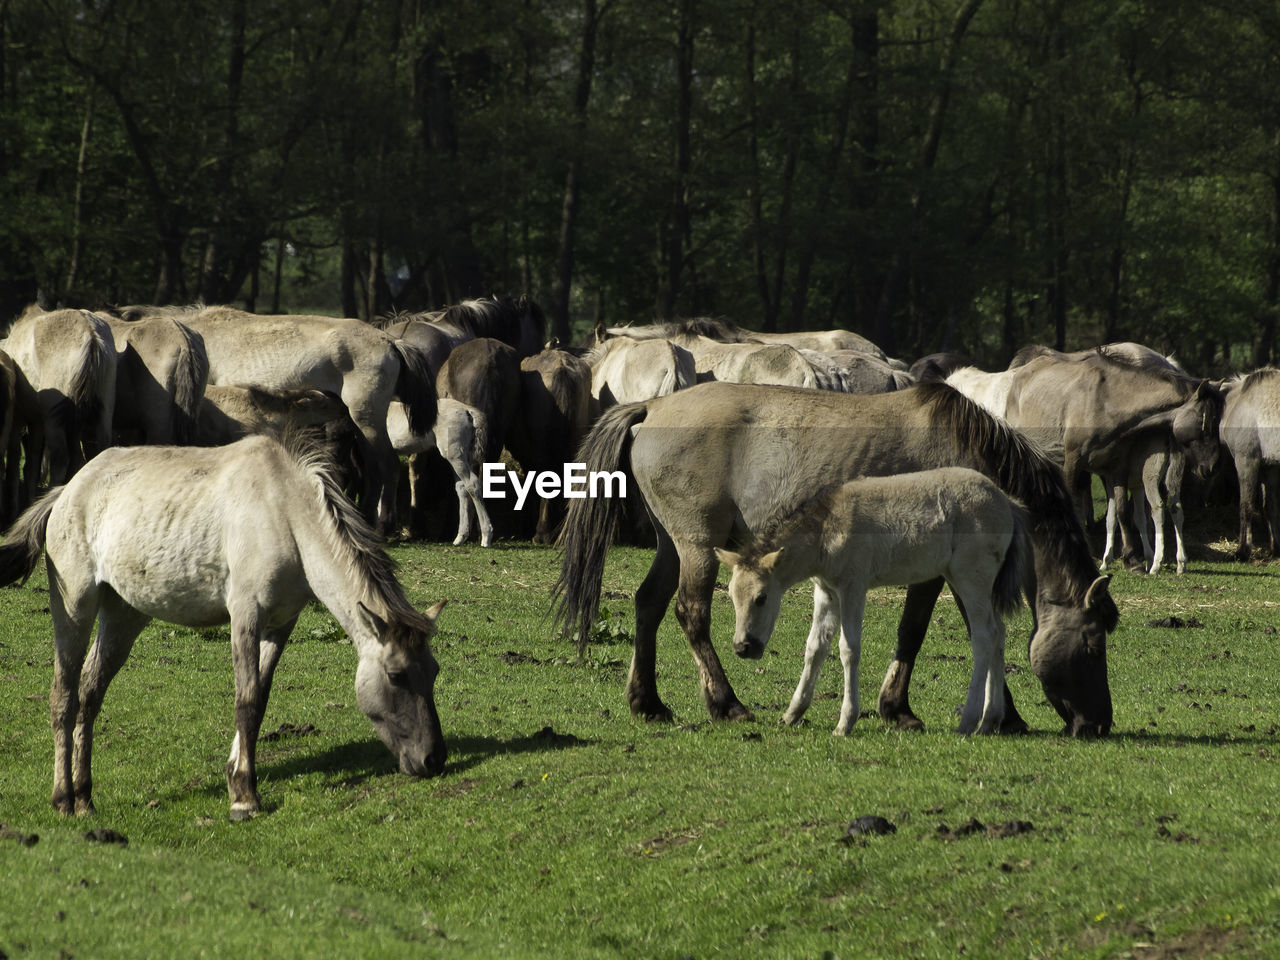 Widl horses in germany